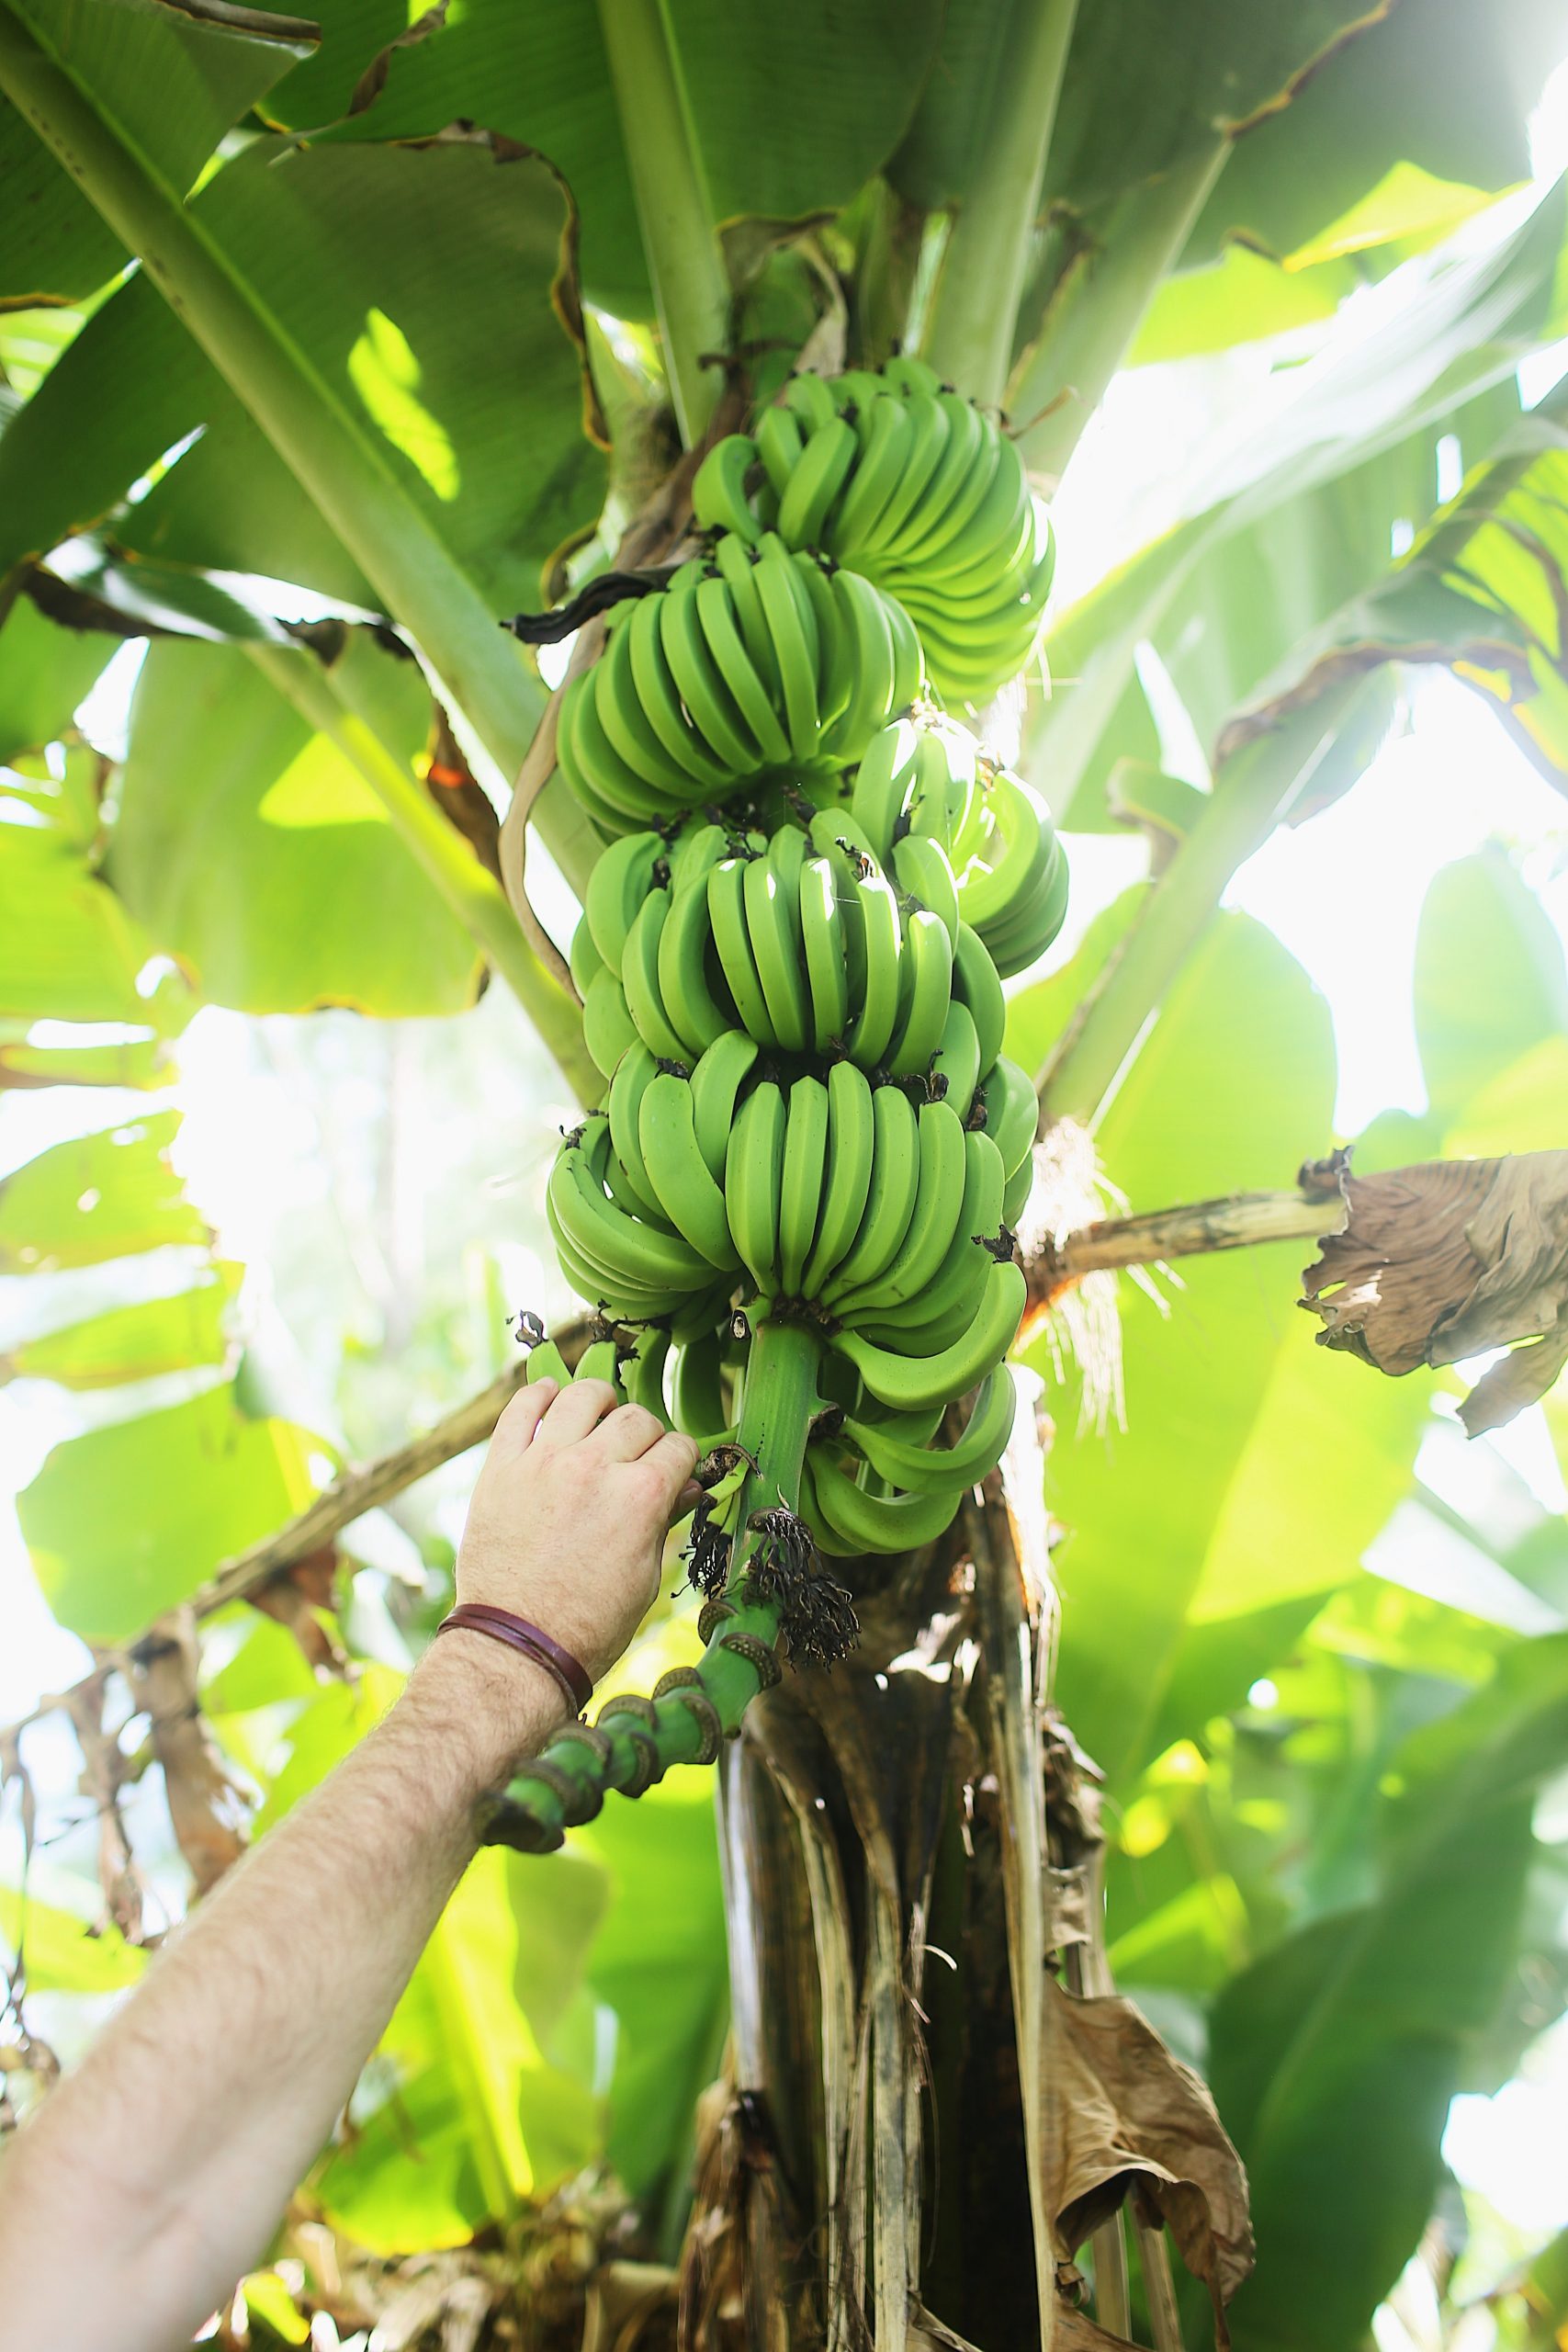 How Long Does It Take For A Banana Tree To Bear Fruit? (From Zone 8 To 13)